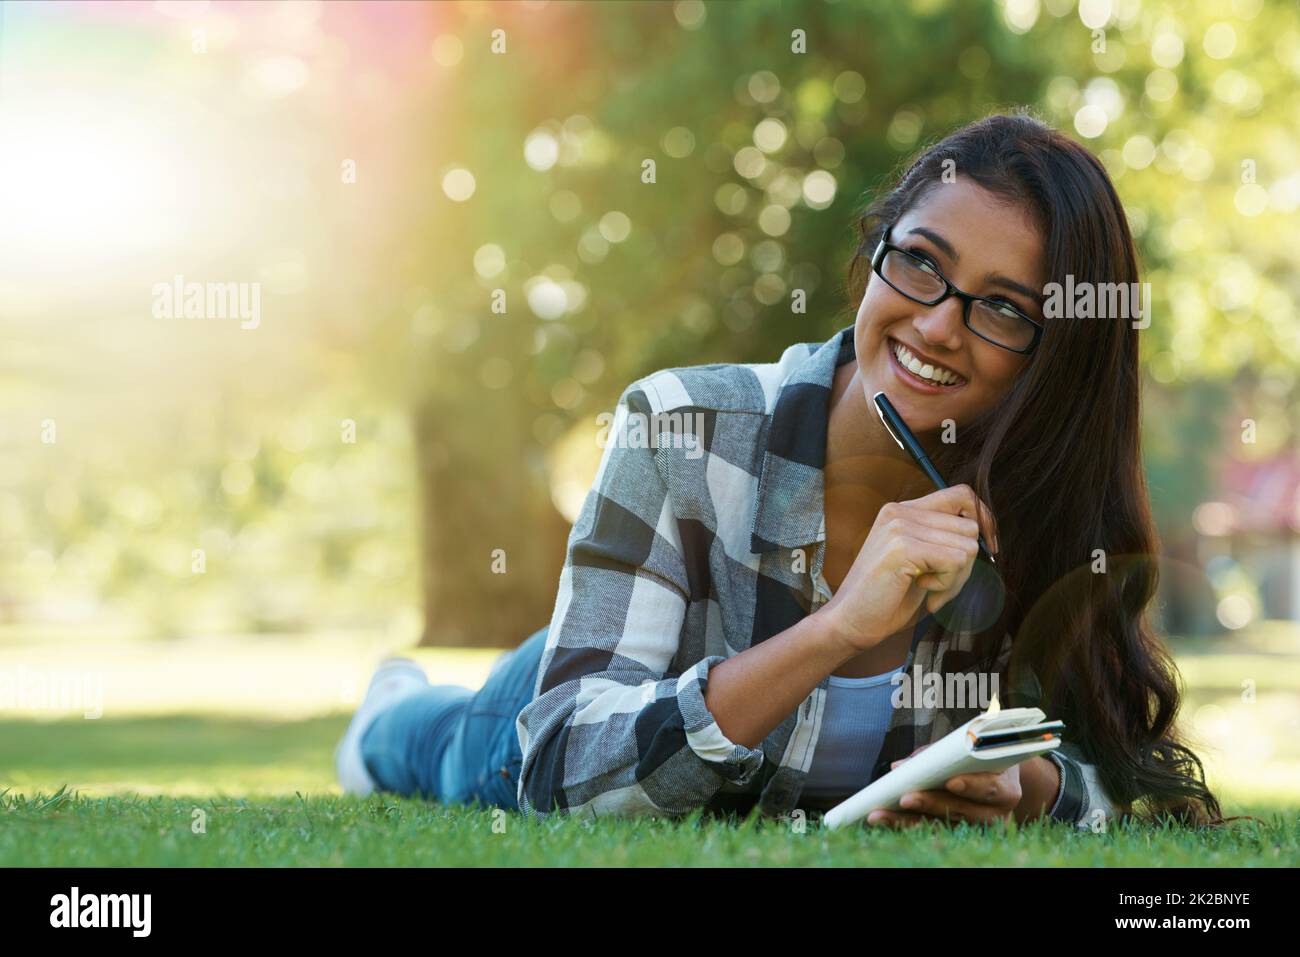 Jotting down her thoughts. A young woman lying on the grass writing in a notebook. Stock Photo